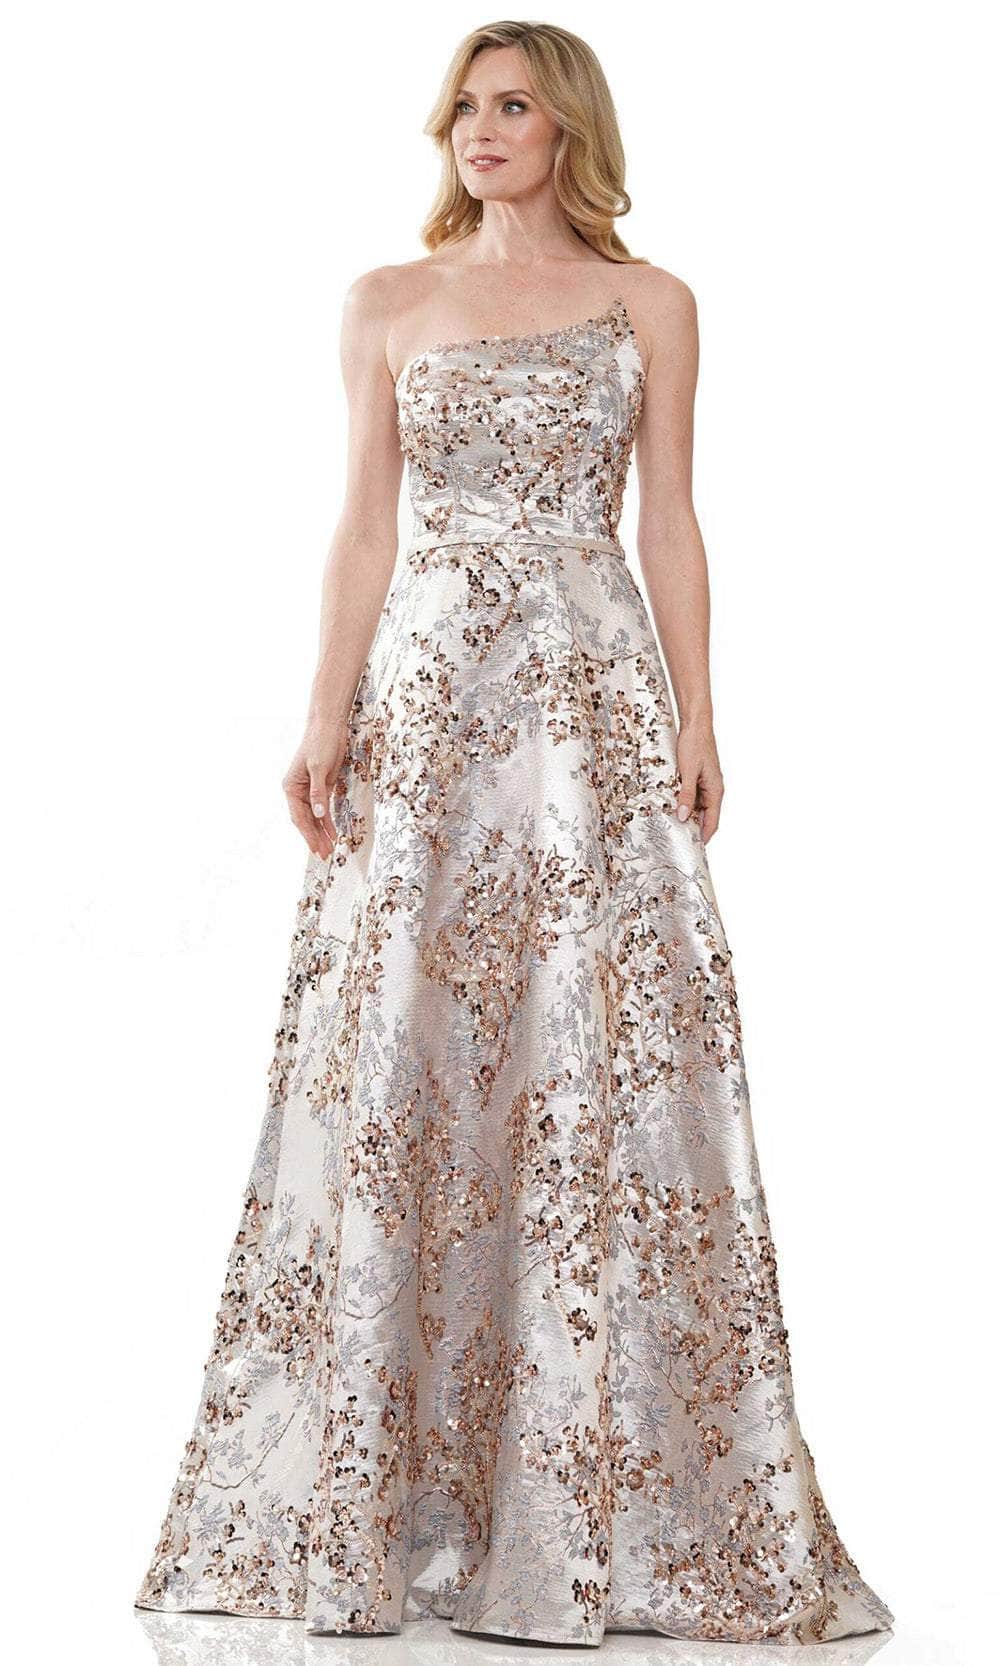 Image of Rina Di Montella RD2913 - Strapless Beaded A-Line Dress